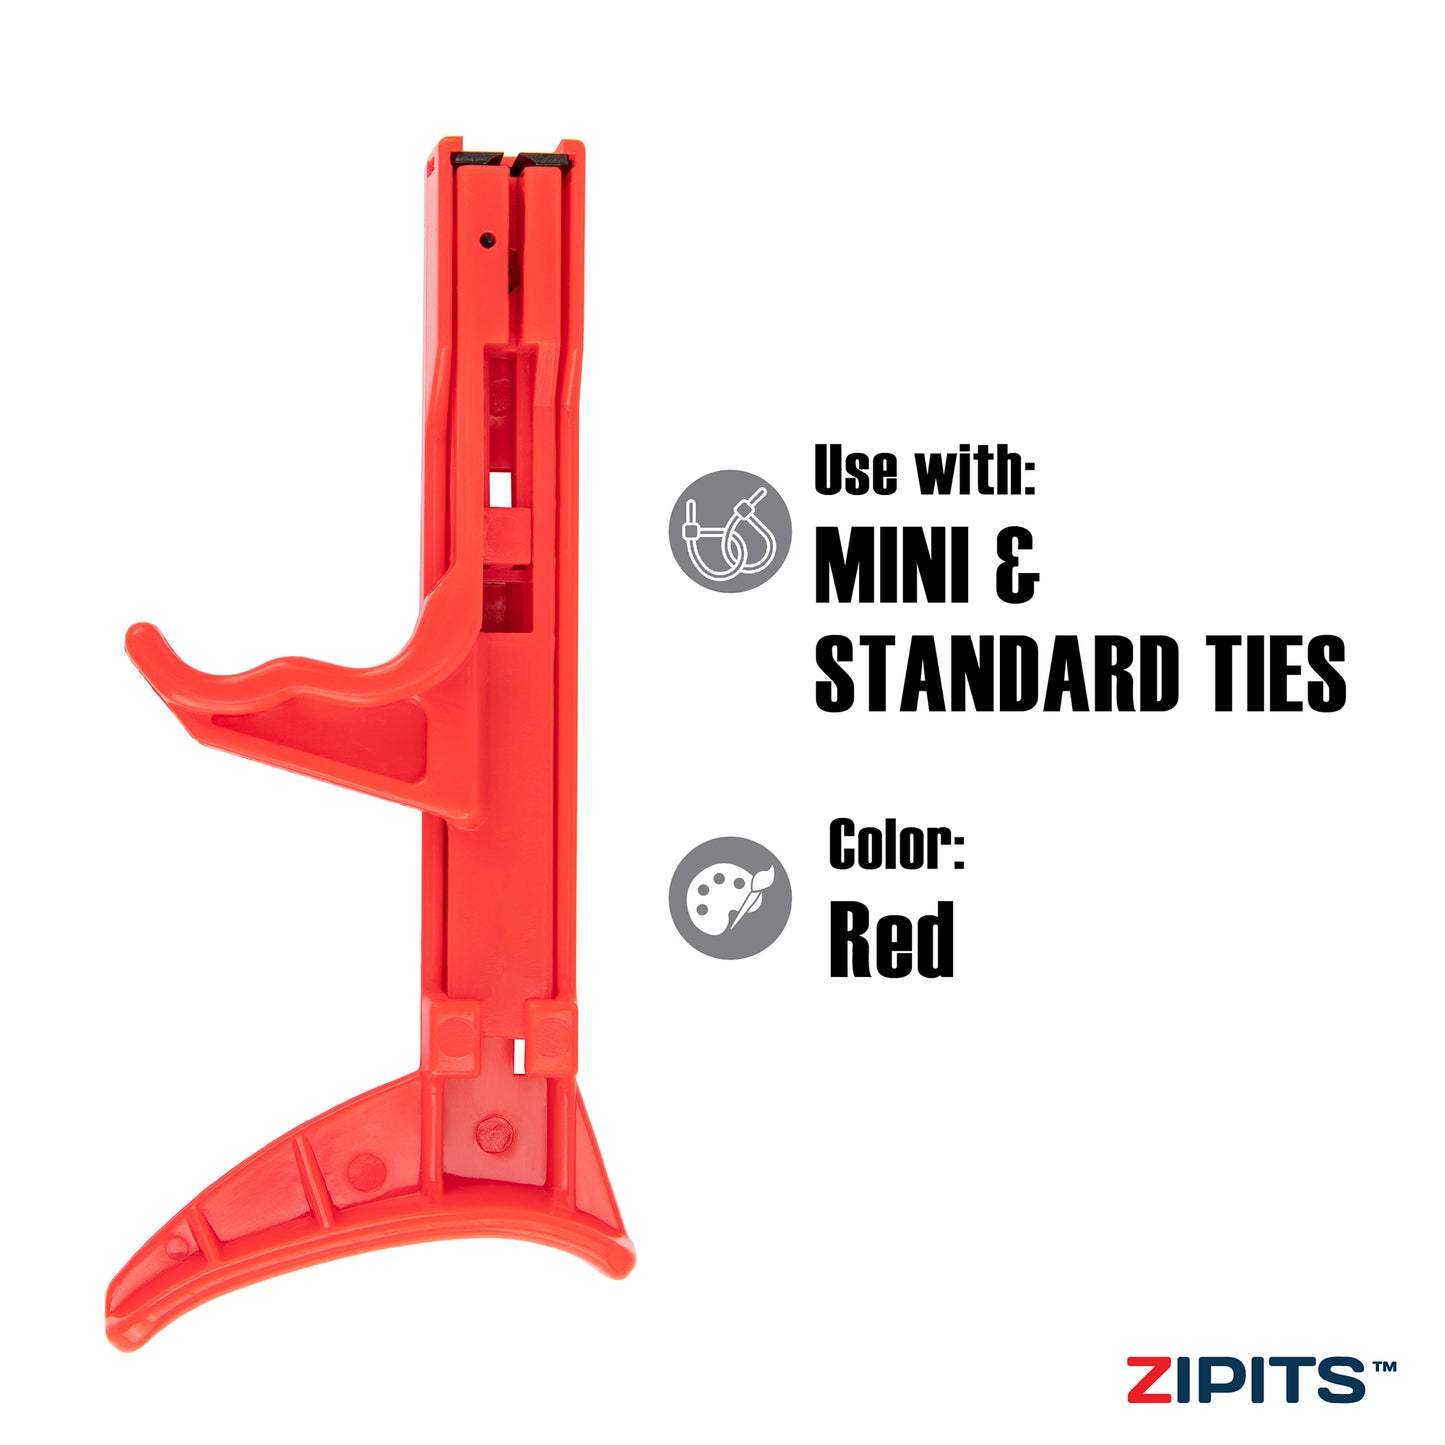 Cable Tie Gun - Red